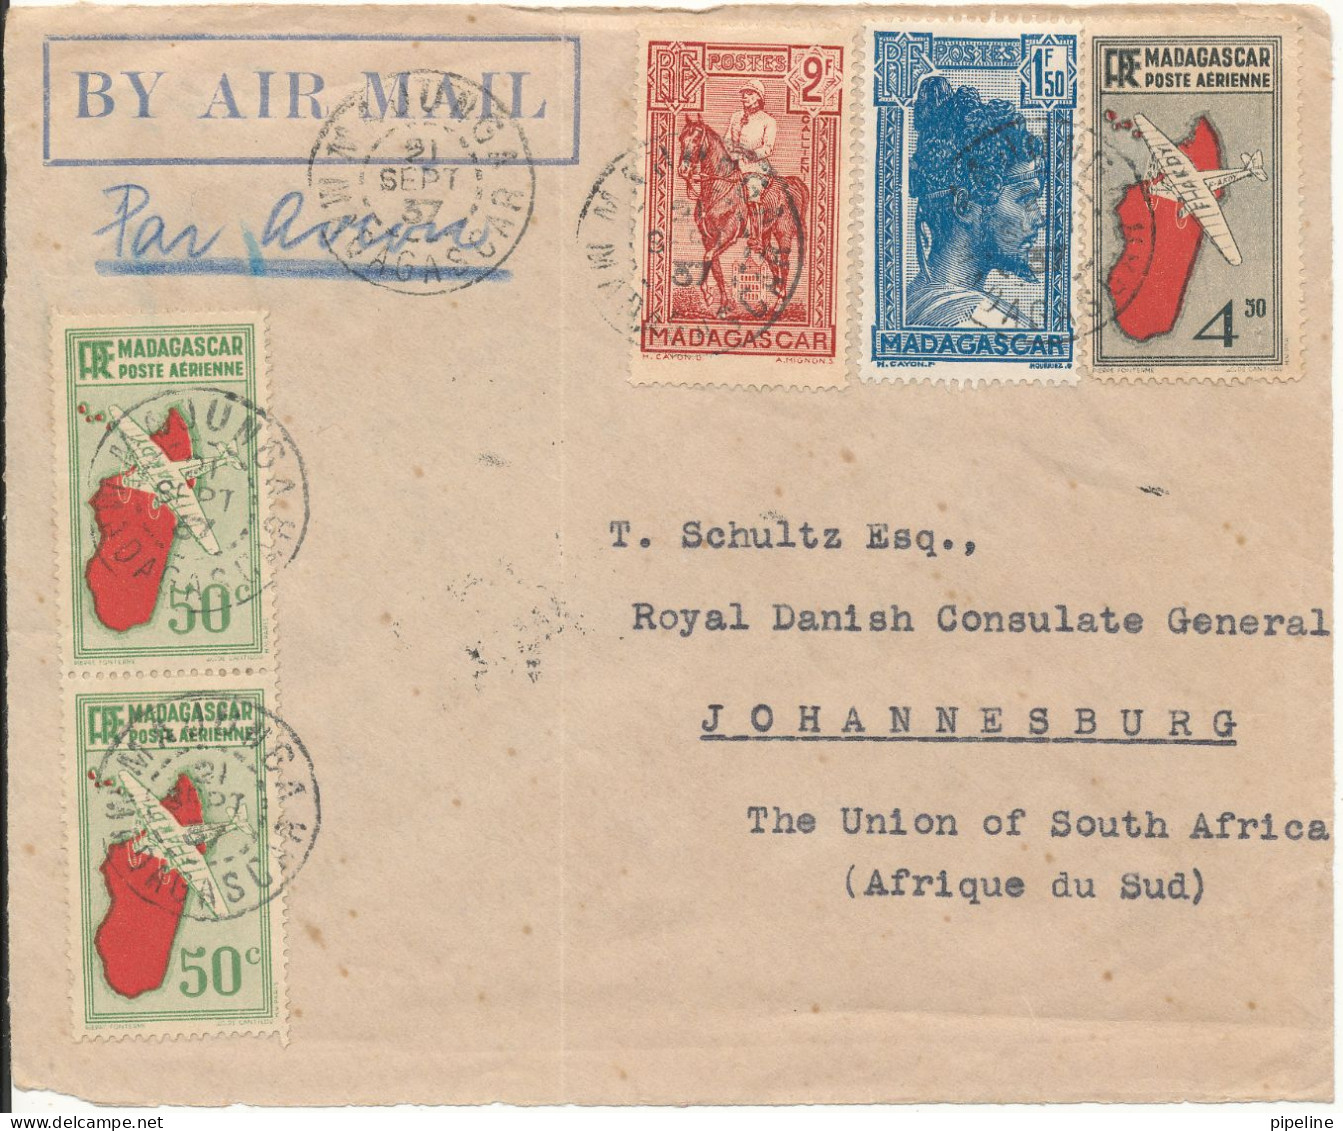 Madagascar FRONTPAGE Of A Cover Sent To The Royal Danish Consulate Johannesburg South Africa 21-9-1937 NB: NB : - Poste Aérienne